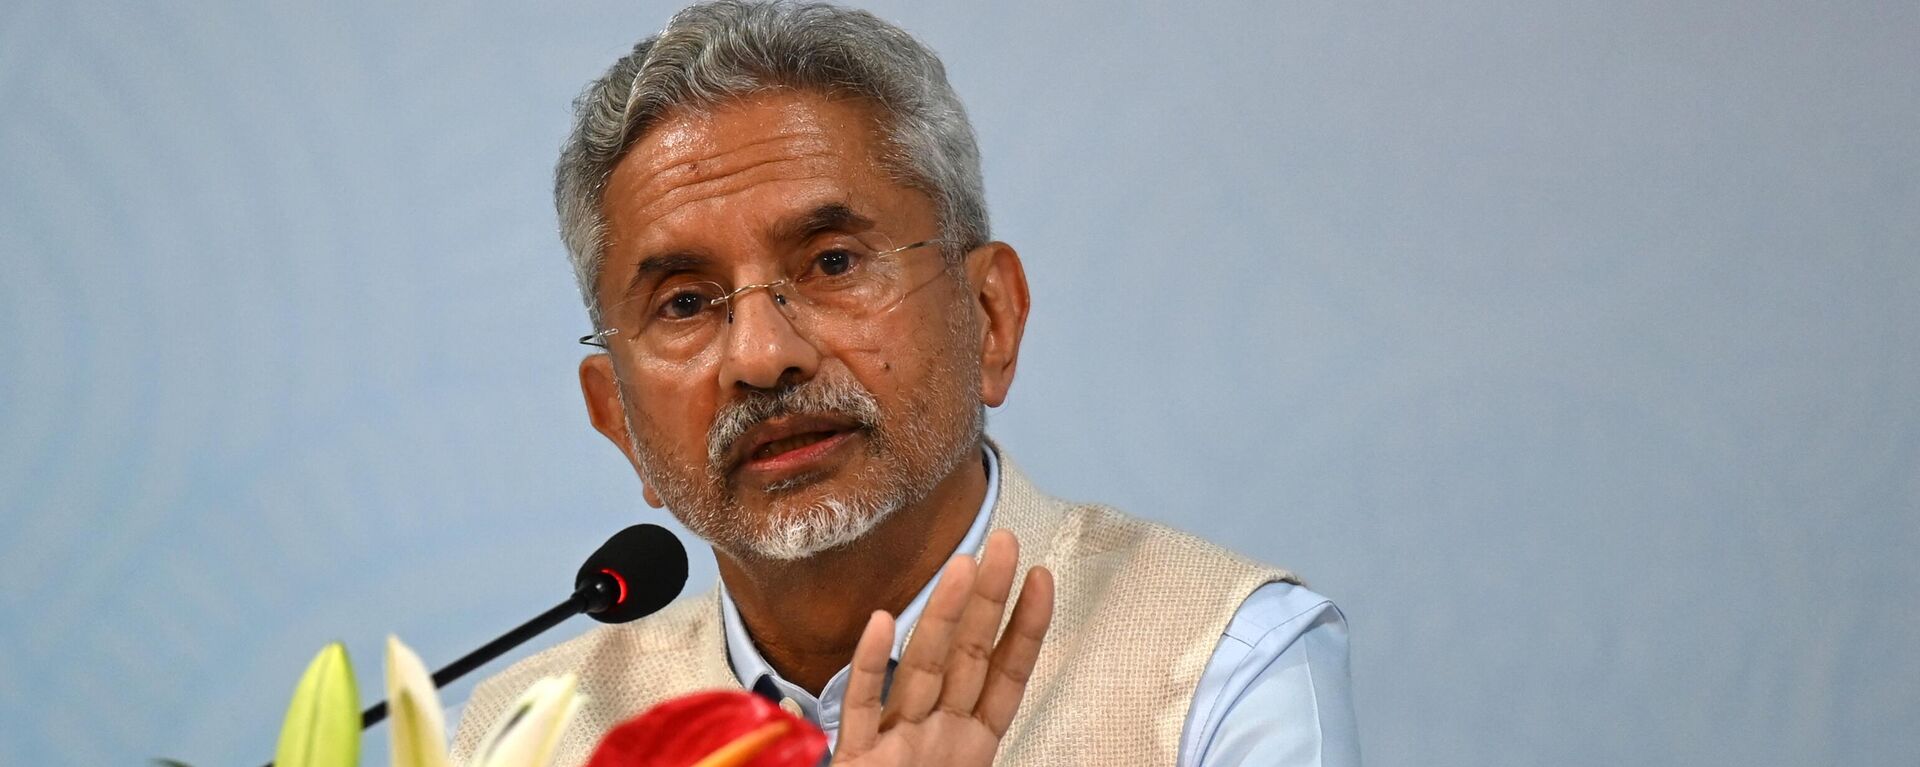 India's Foreign Minister Subrahmanyam Jaishankar gestures as he speaks during a news conference at the media centre for the Shanghai Cooperation Organization (SCO) meeting in Benaulim on May 5, 2023. (Photo by Punit PARANJPE / AFP) - Sputnik भारत, 1920, 05.12.2023